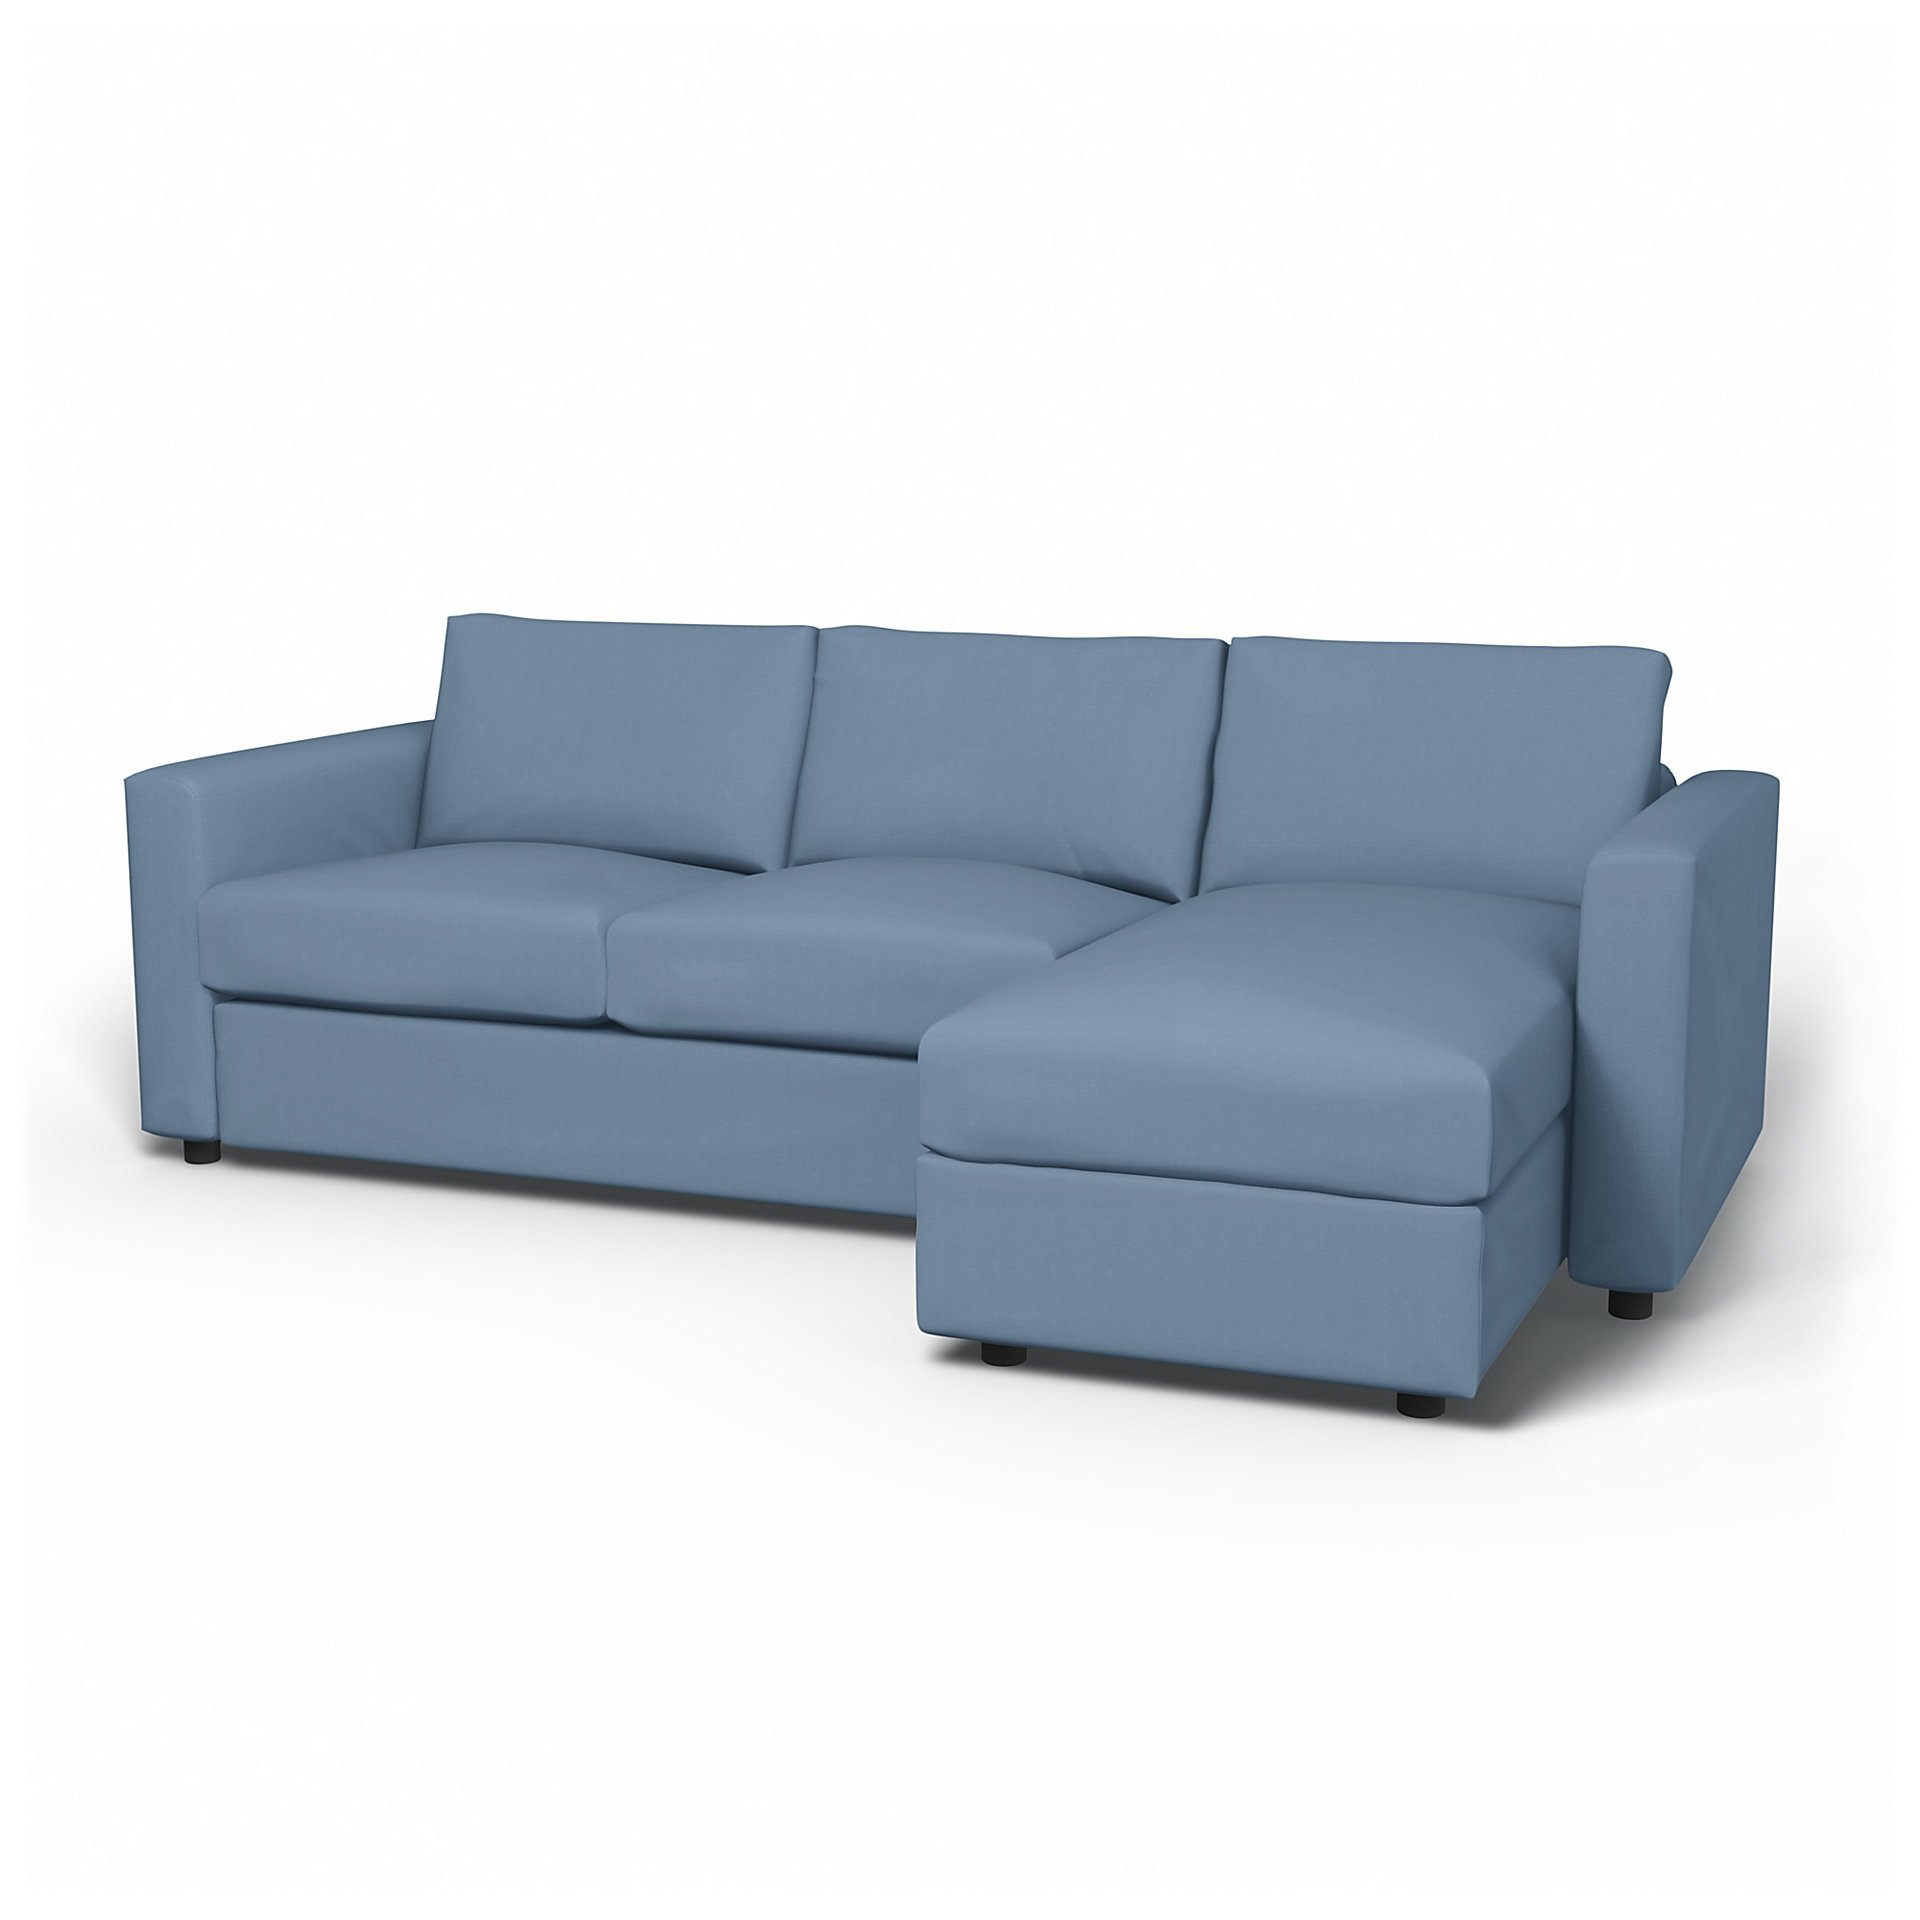 IKEA - Vimle 2 Seater Sofa with Chaise Cover, Dusty Blue, Cotton - Bemz